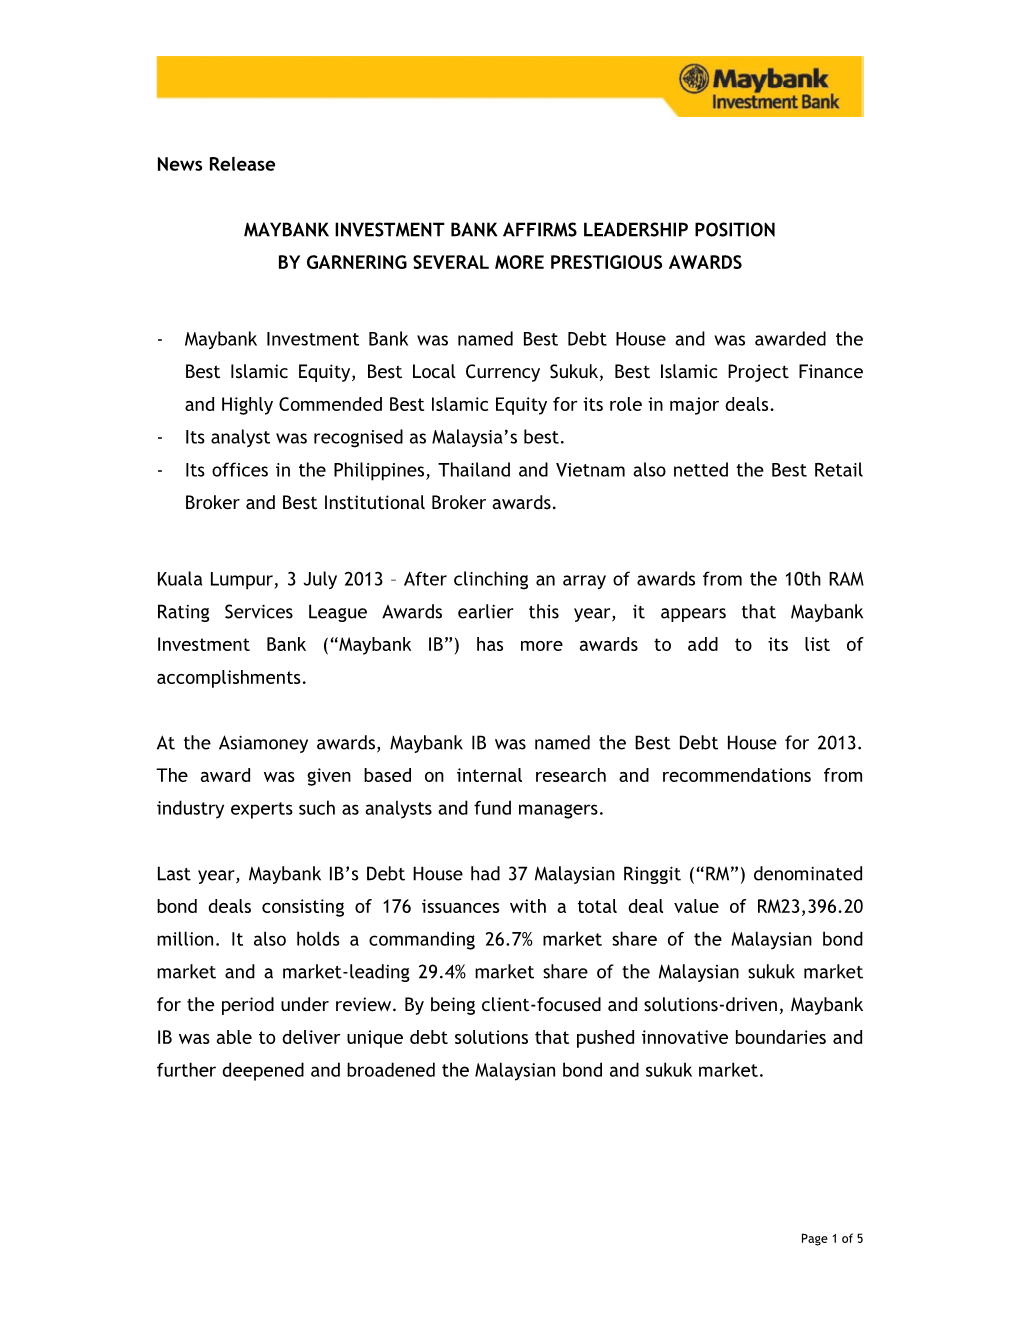 News Release MAYBANK INVESTMENT BANK